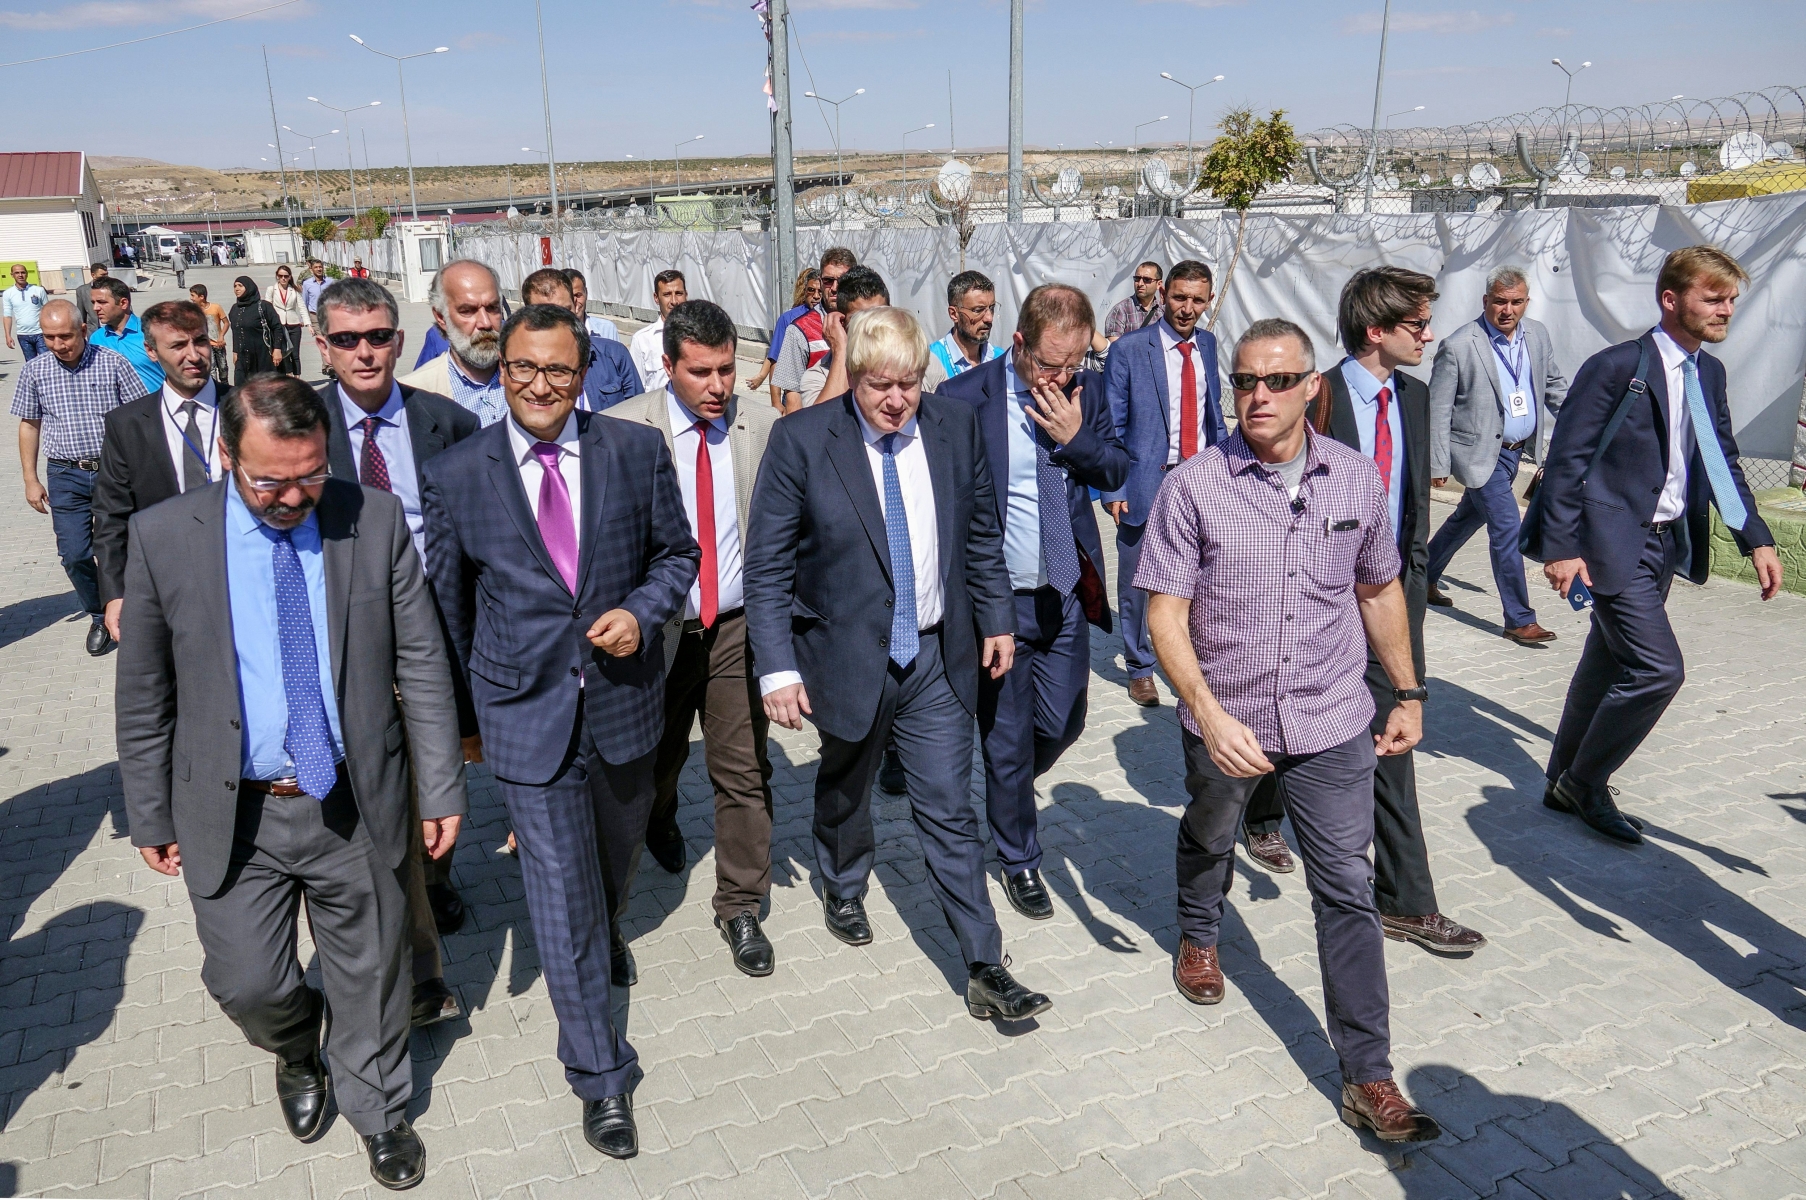 British Foreign Secretary Boris Johnson, center, is surrounded by Turkish officials during his visit to the Syrian refugee camp in Nizip in Gaziantep province, Turkey, Monday, Sept. 26, 2016. Johnson is on a three-day visit to Turkey.(Ali Ihsan Ozturk/Anadolu Agency Pool via AP ) Turkey Britain